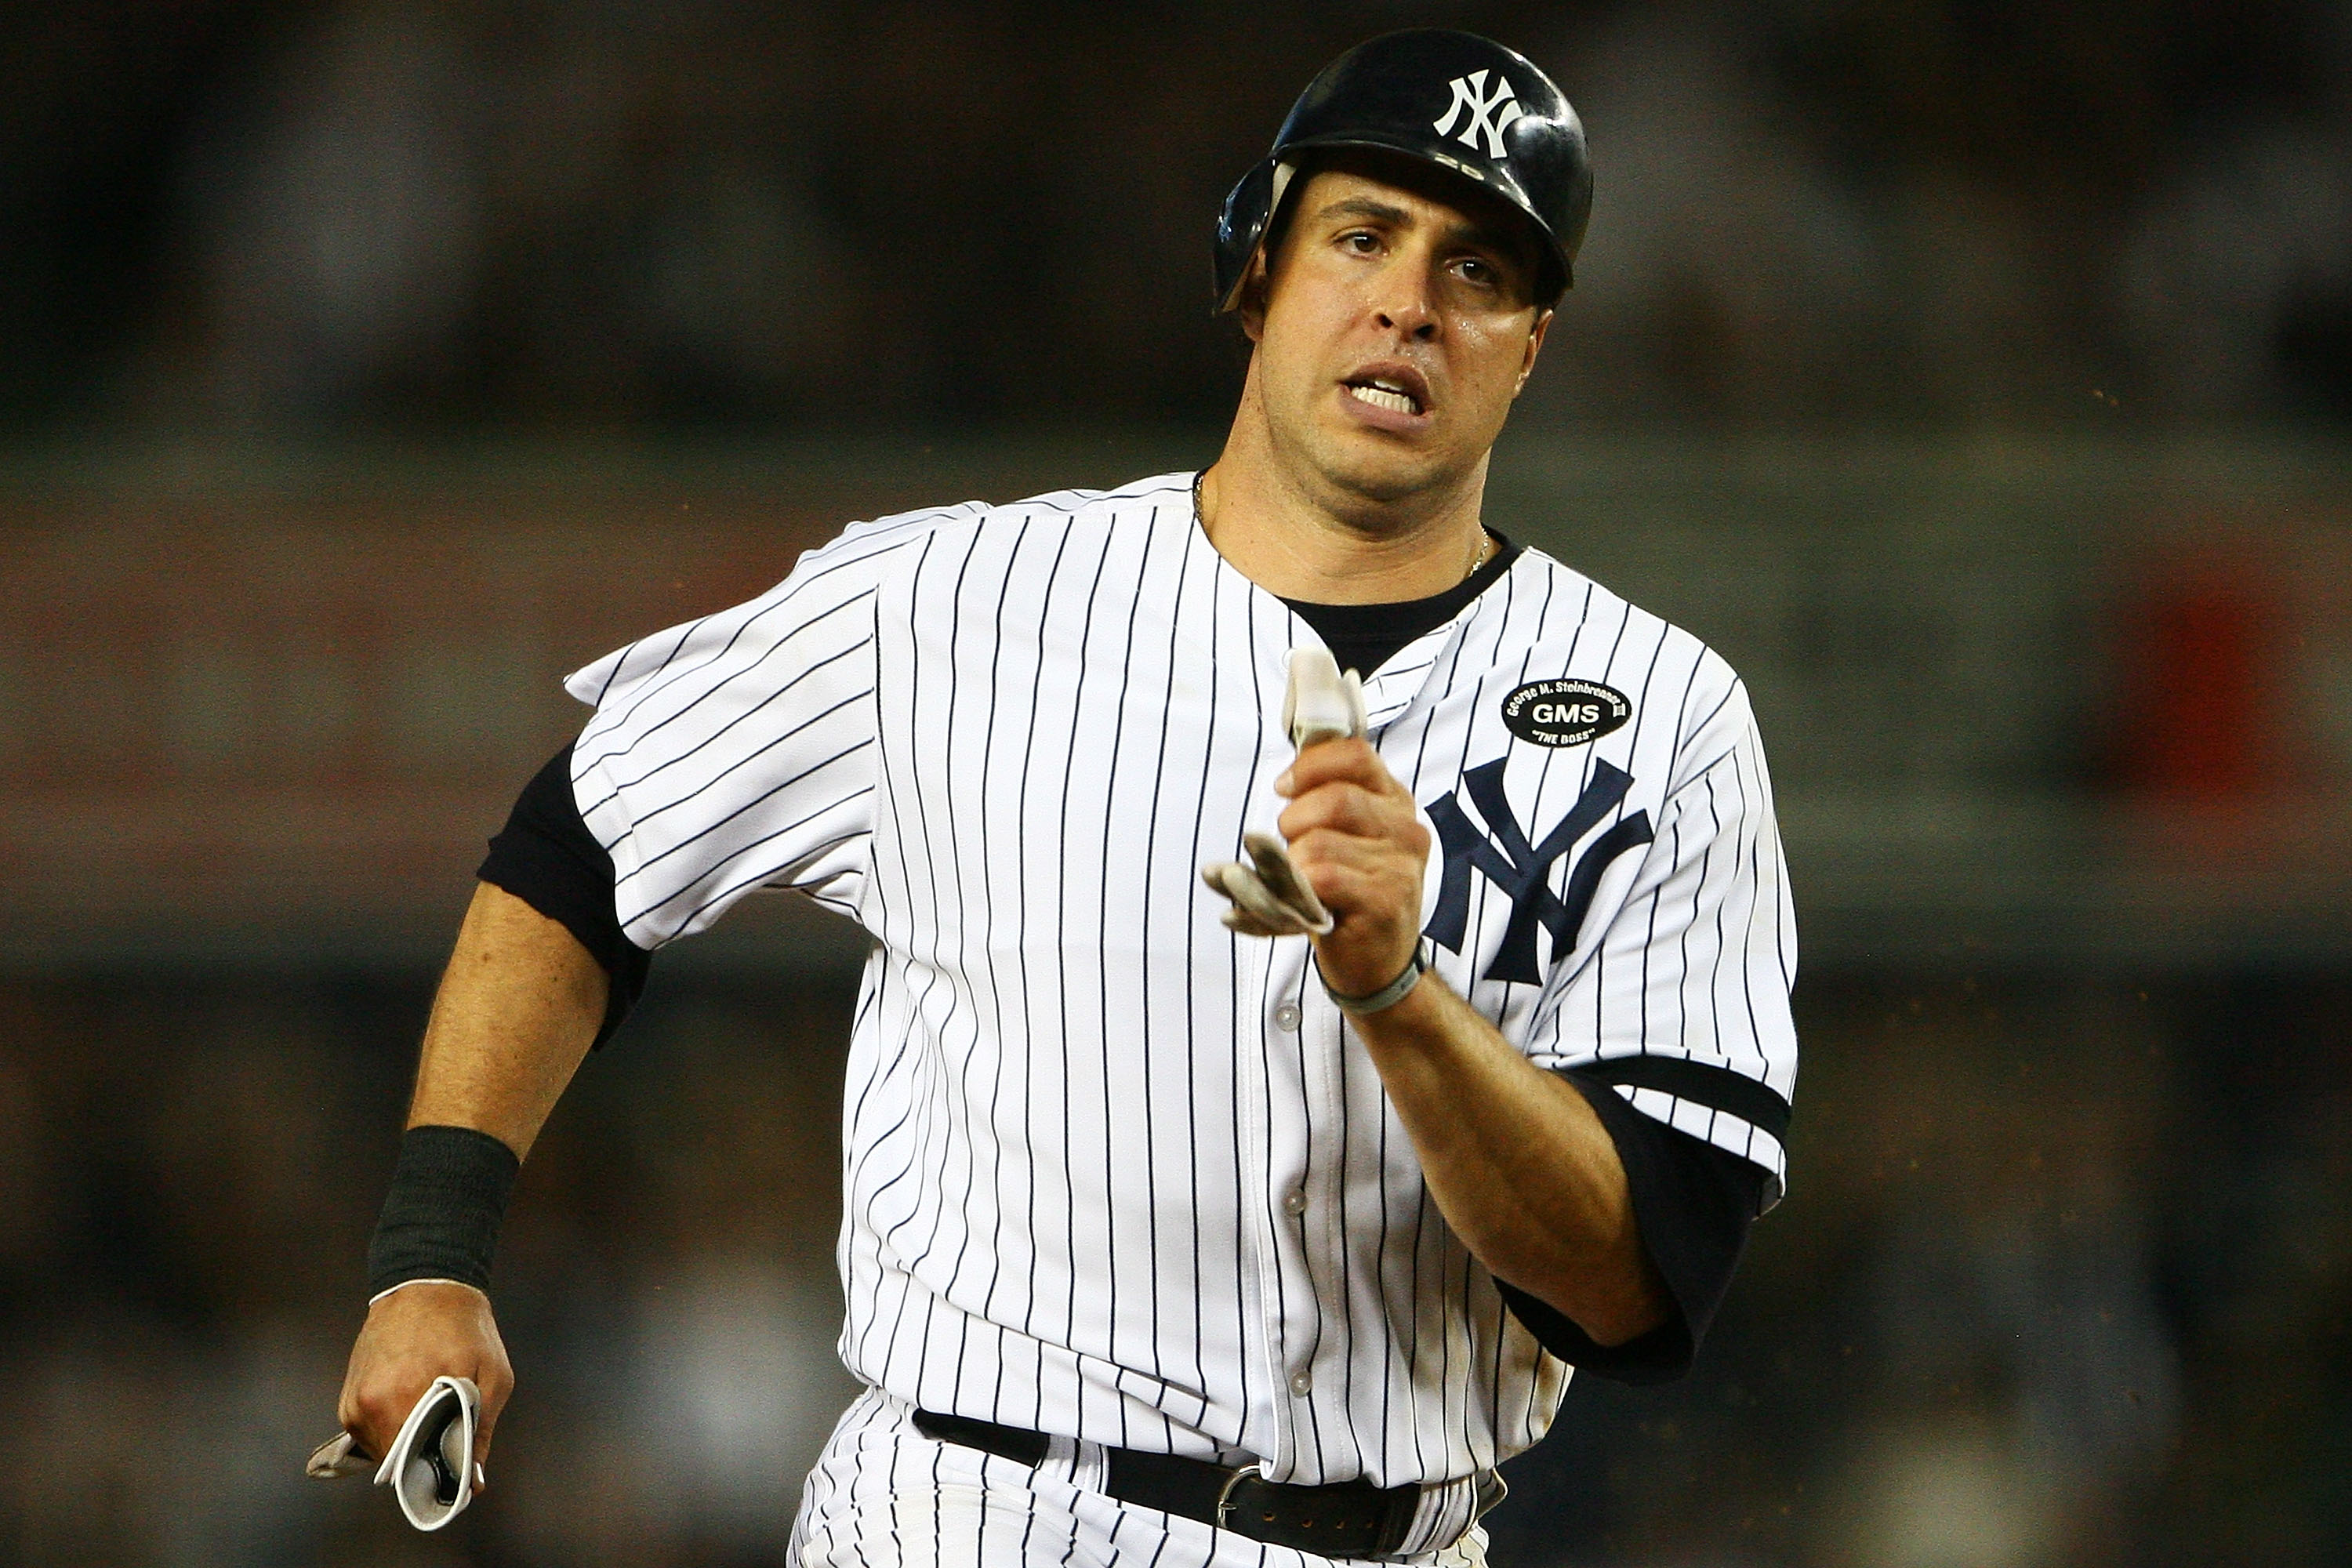 NEW YORK - SEPTEMBER 21:  Mark Teixeira #25 of the New York Yankees runs on a two run double hit by Robinson Cano in the seventh inning against the Tampa Bay Rays on September 21, 2010 at Yankee Stadium in the Bronx borough of New York City.  The Yankees